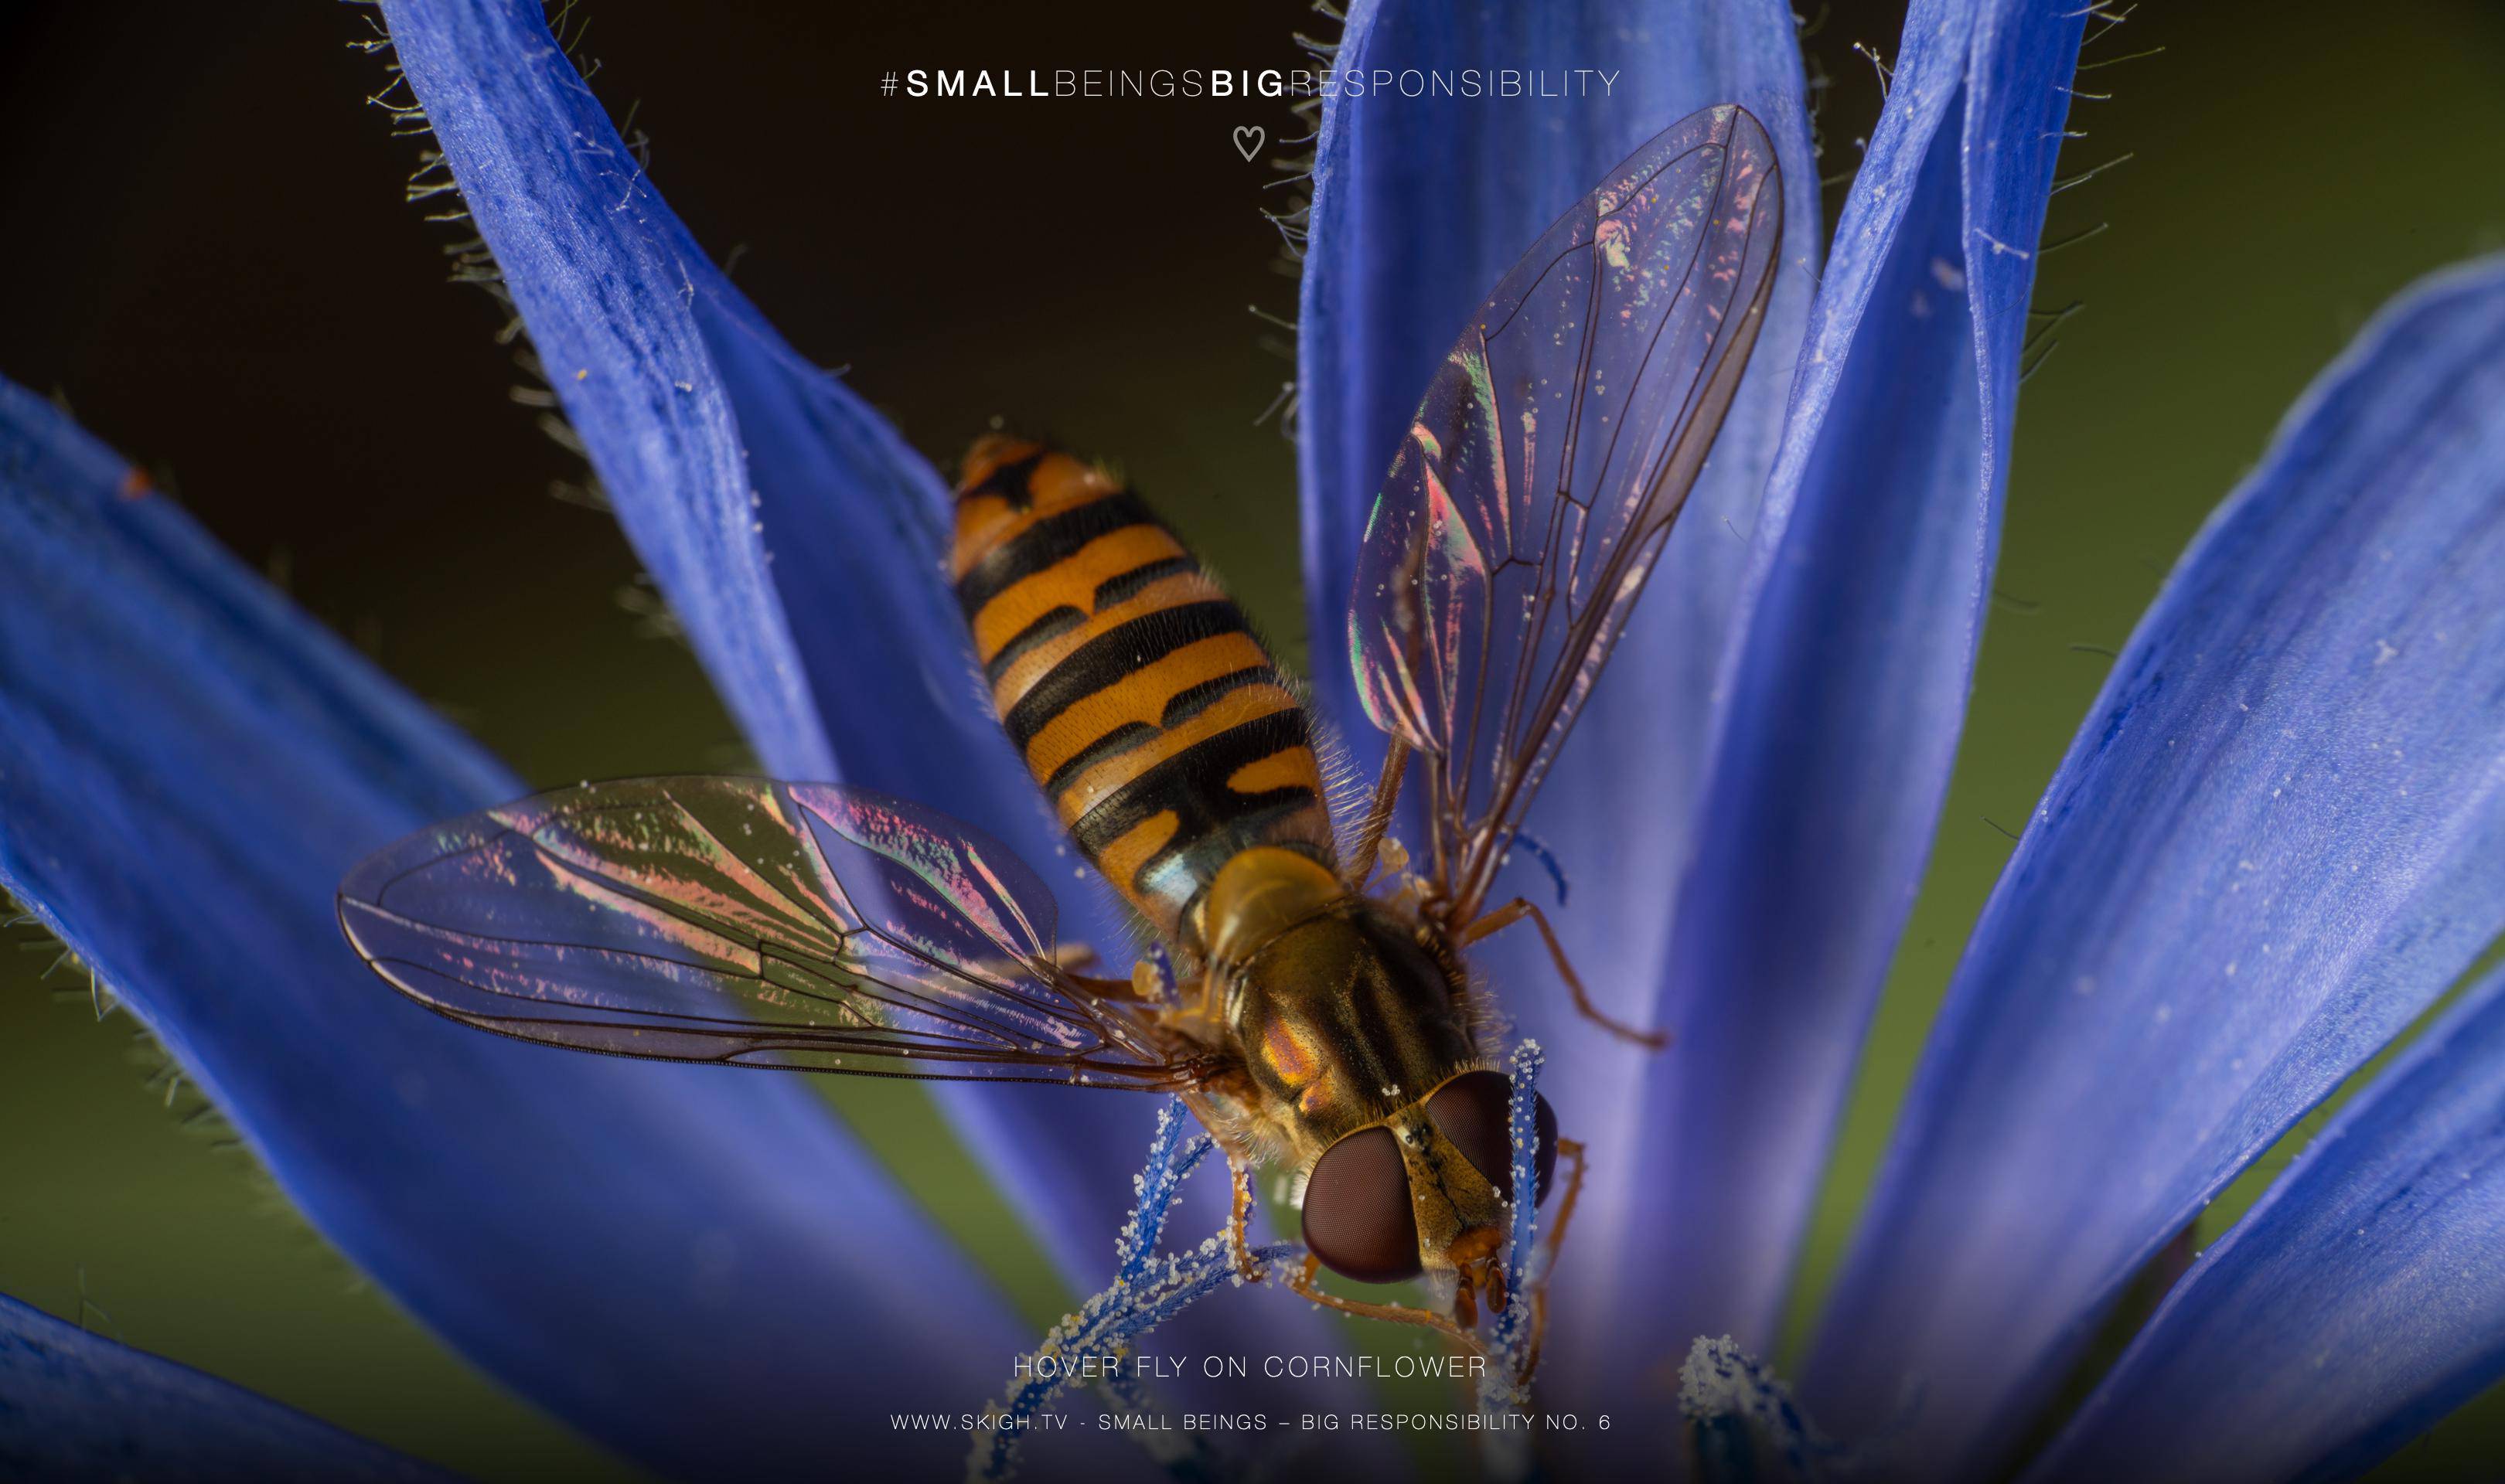 Hover fly on cornflower 